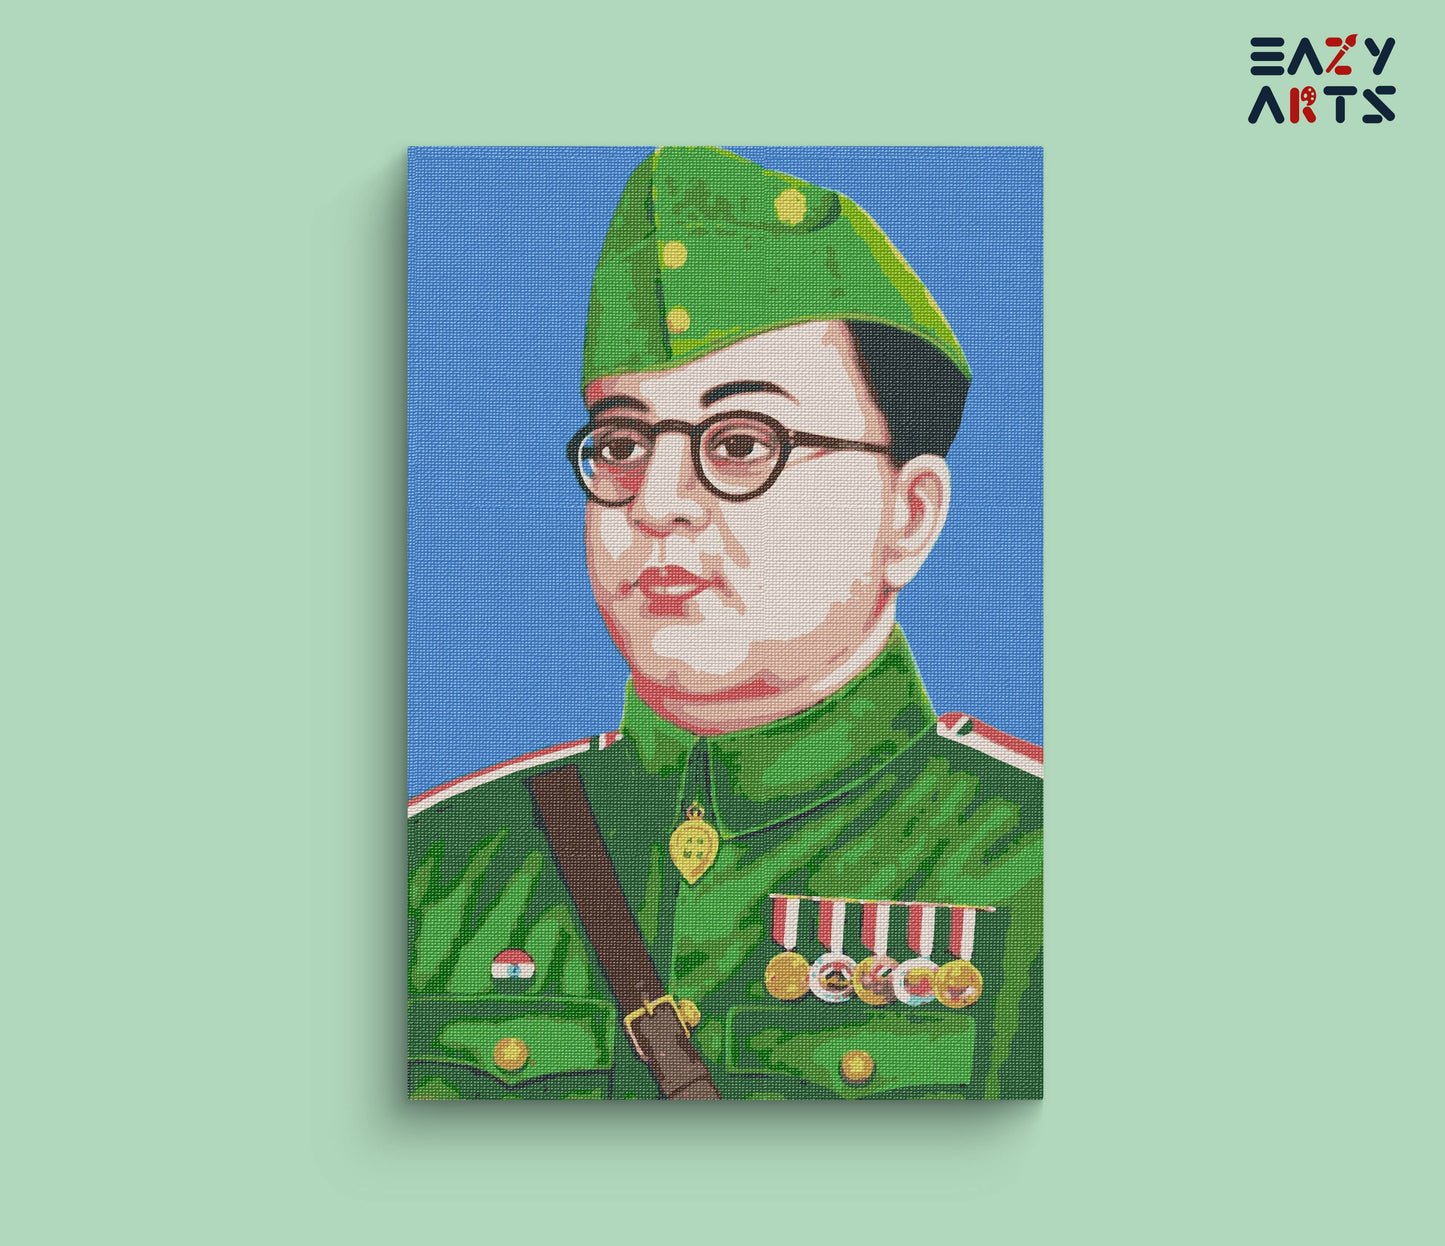 Subhas Chandra Bose paint by numbers